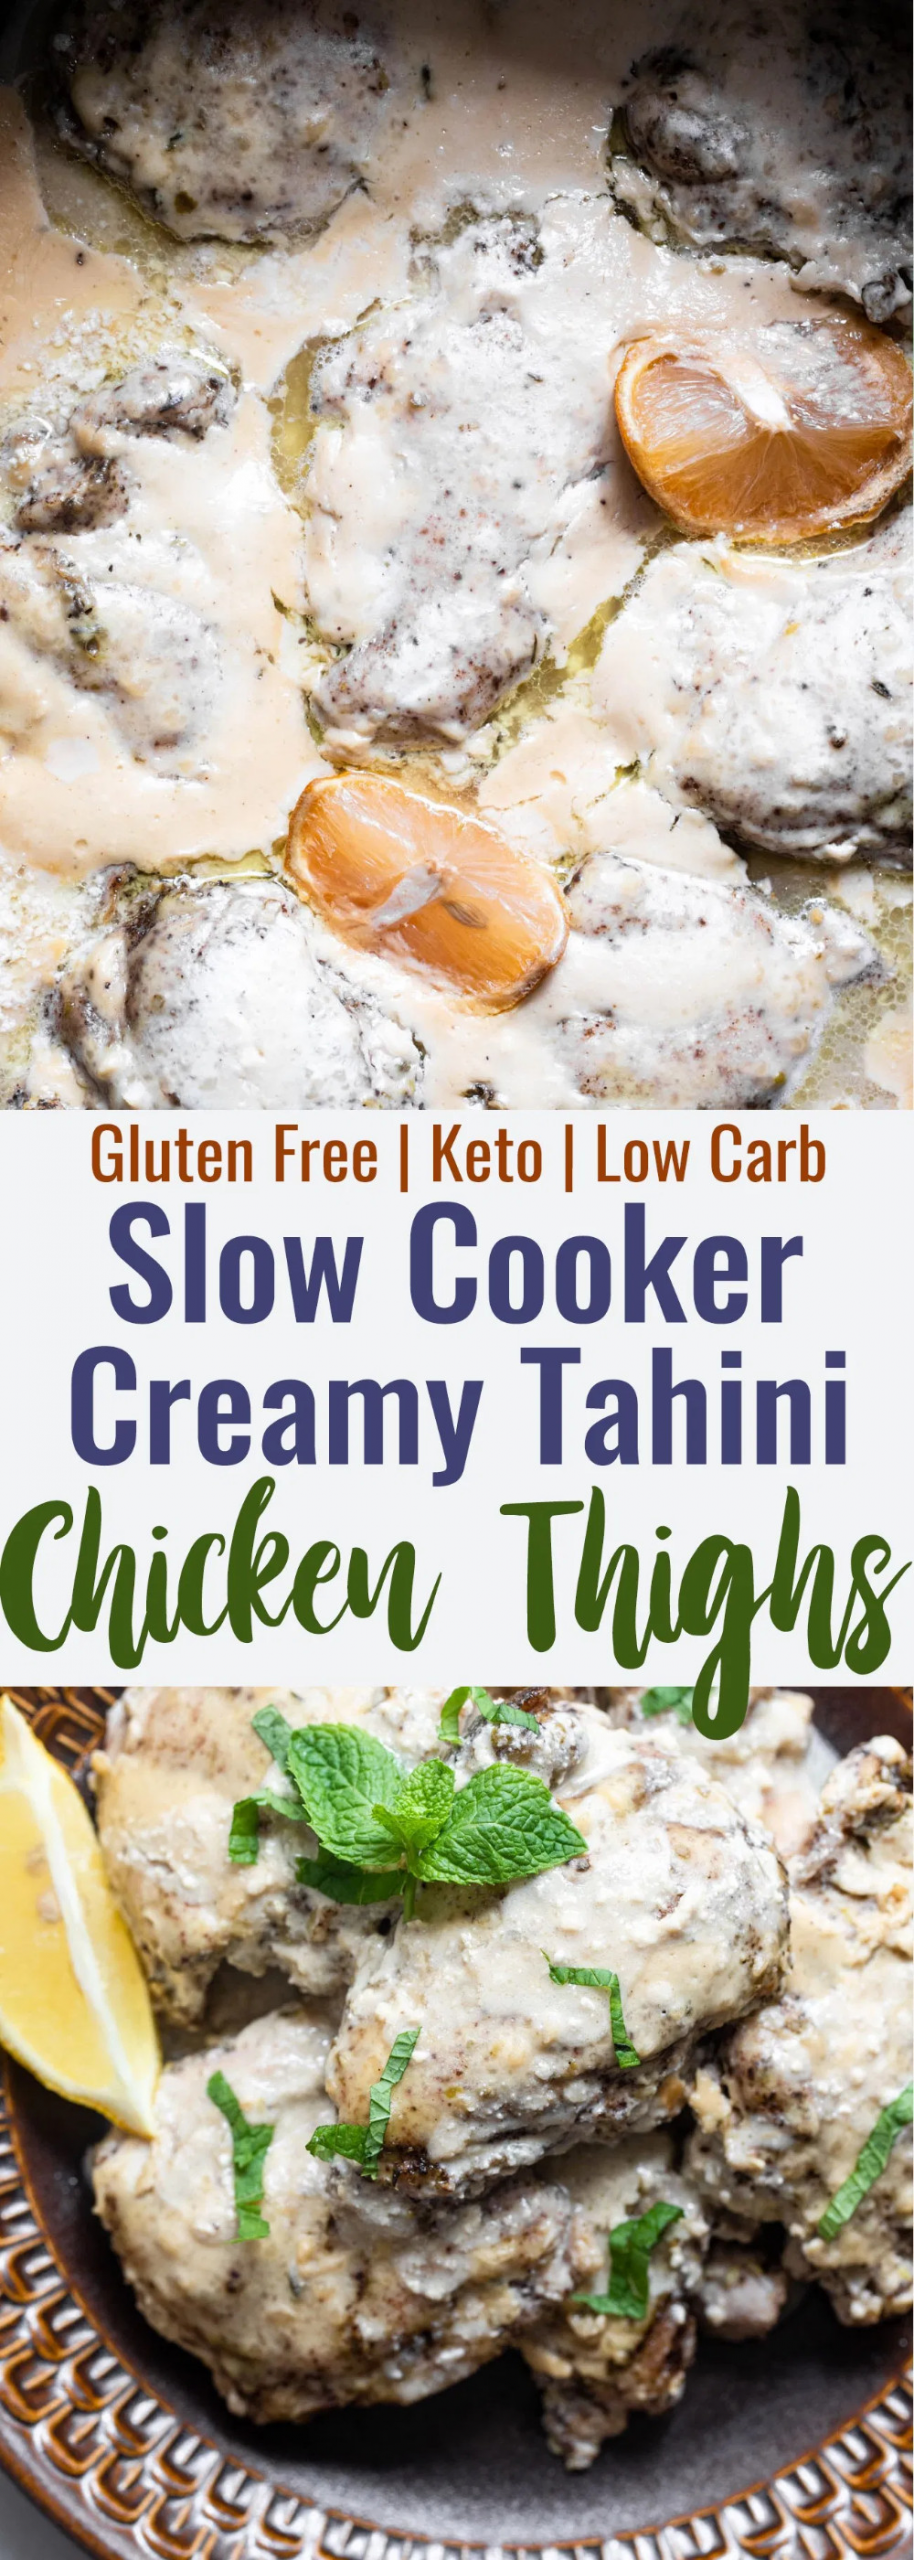 Keto Chicken Thighs Slow Cooker
 Middle Eastern Keto Slow Cooker Chicken Thighs These